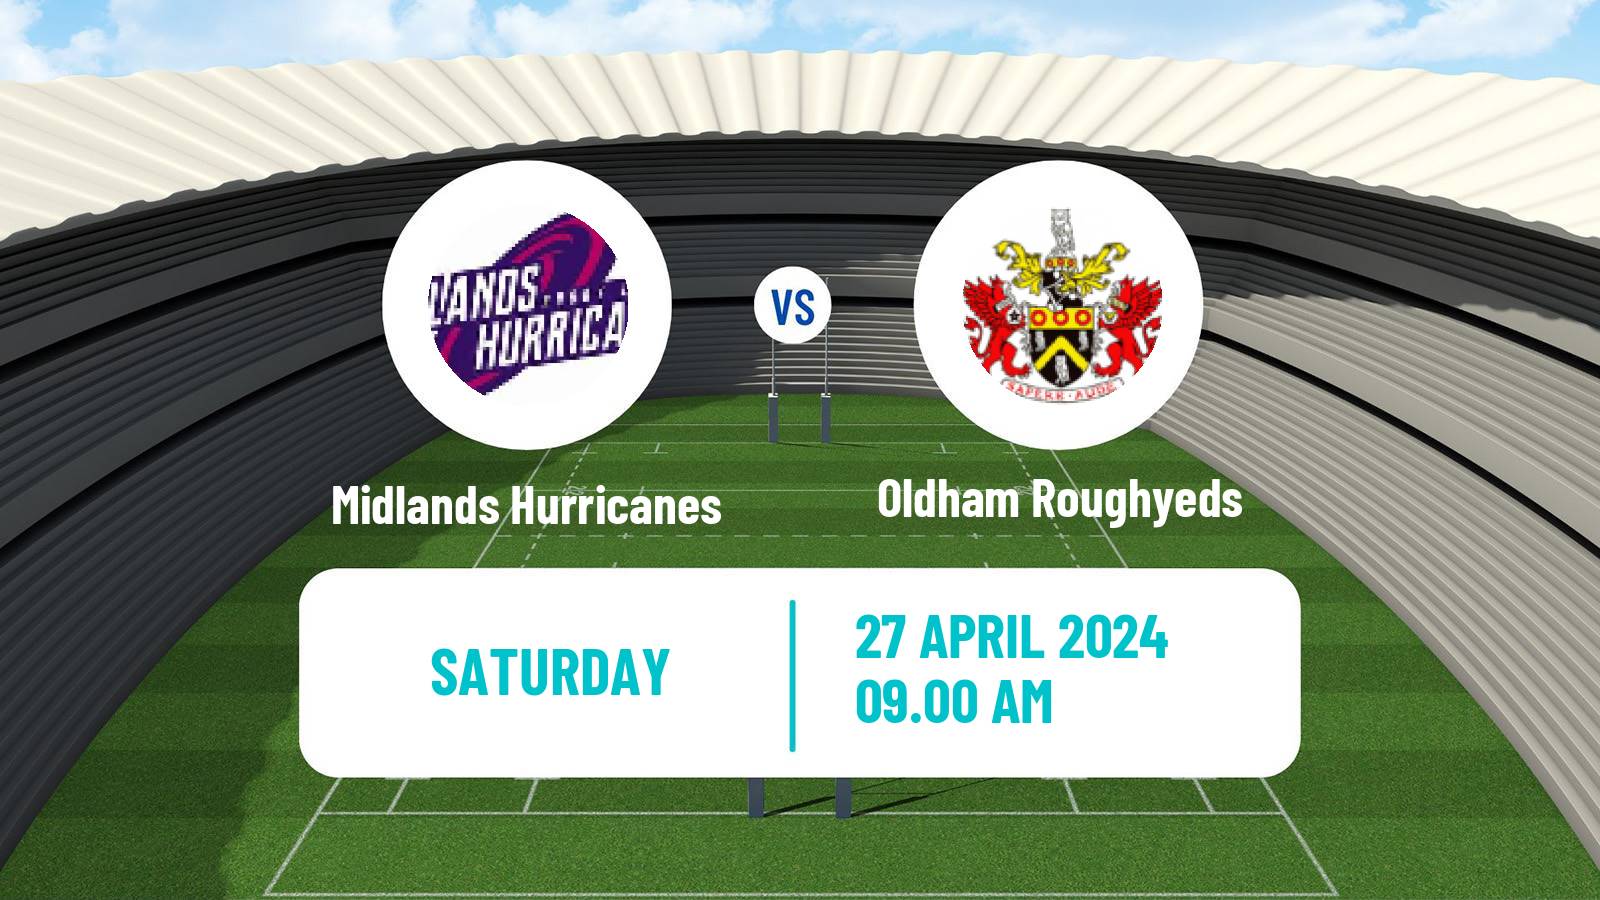 Rugby league English League 1 Rugby League Midlands Hurricanes - Oldham Roughyeds